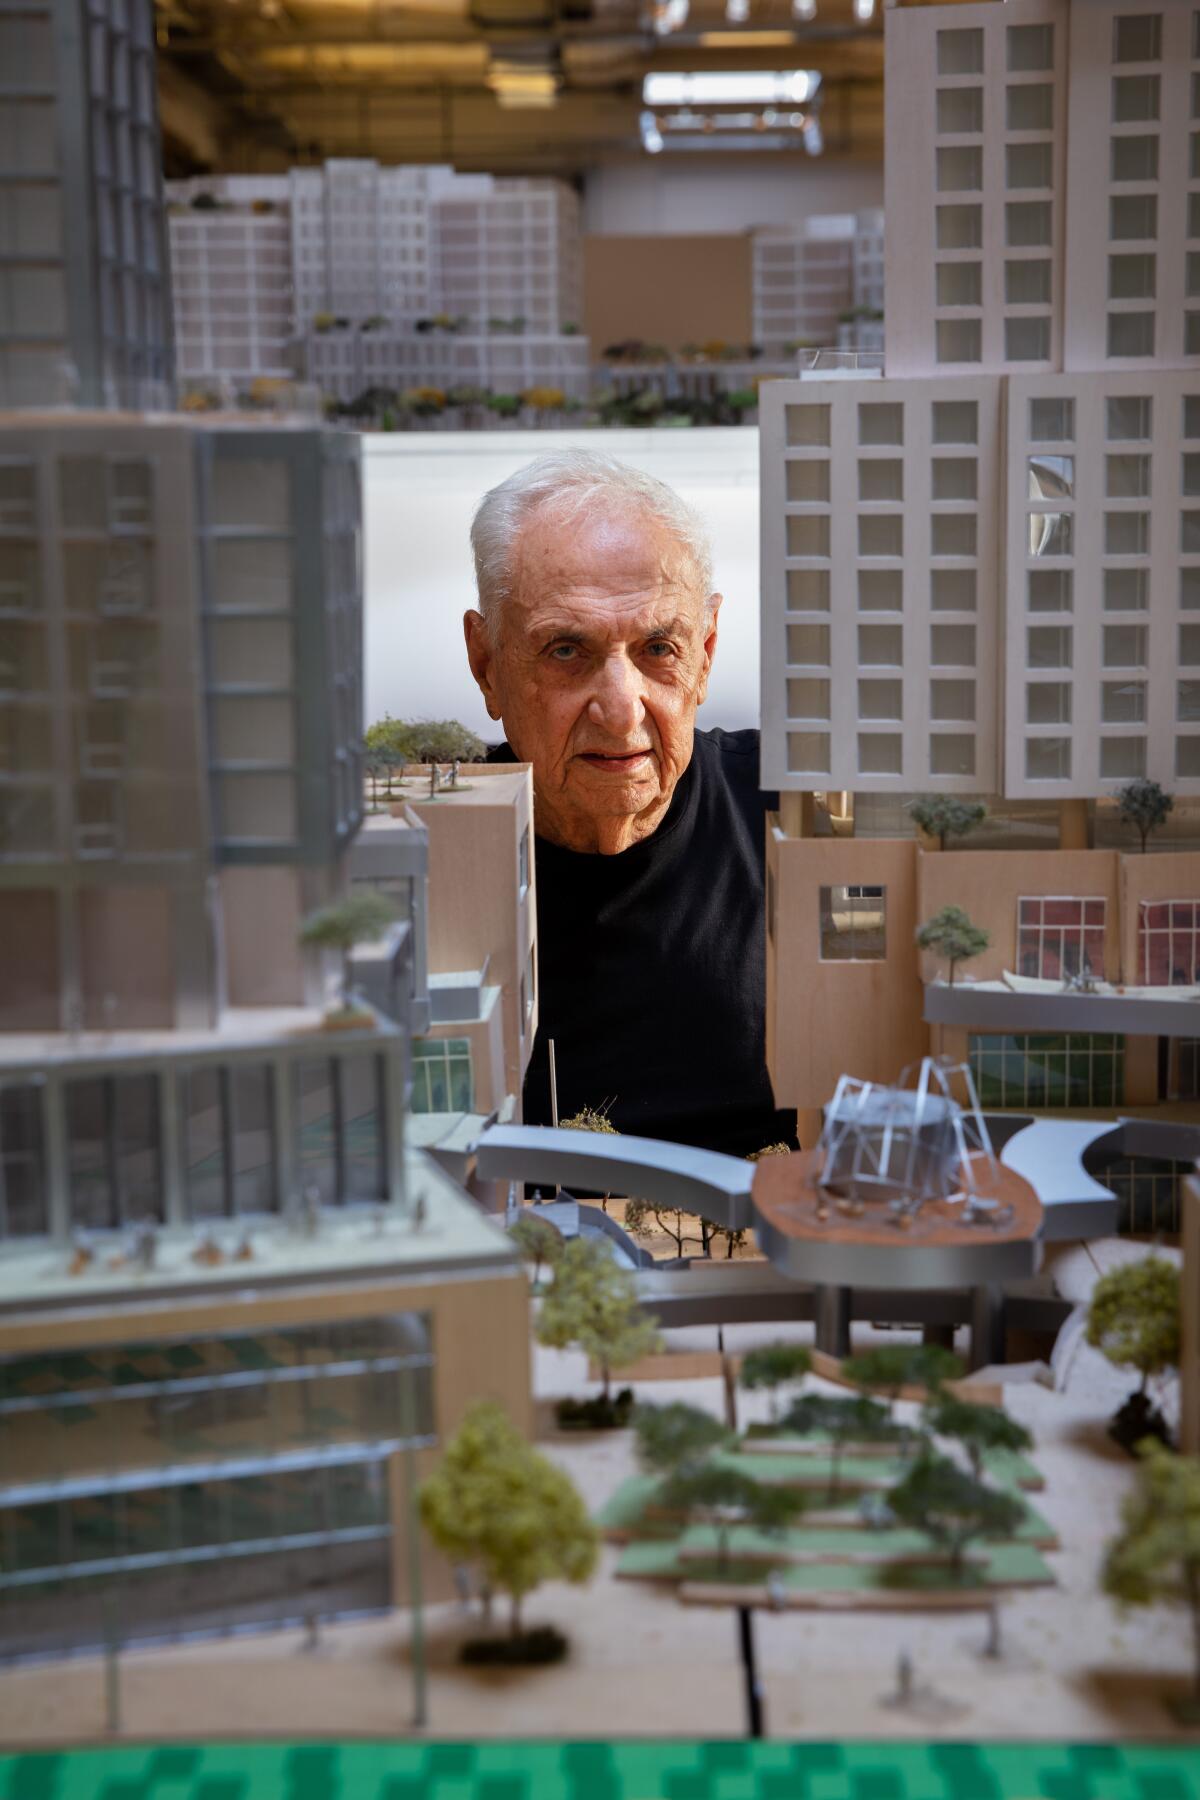 Architect Frank Gehry in his studio